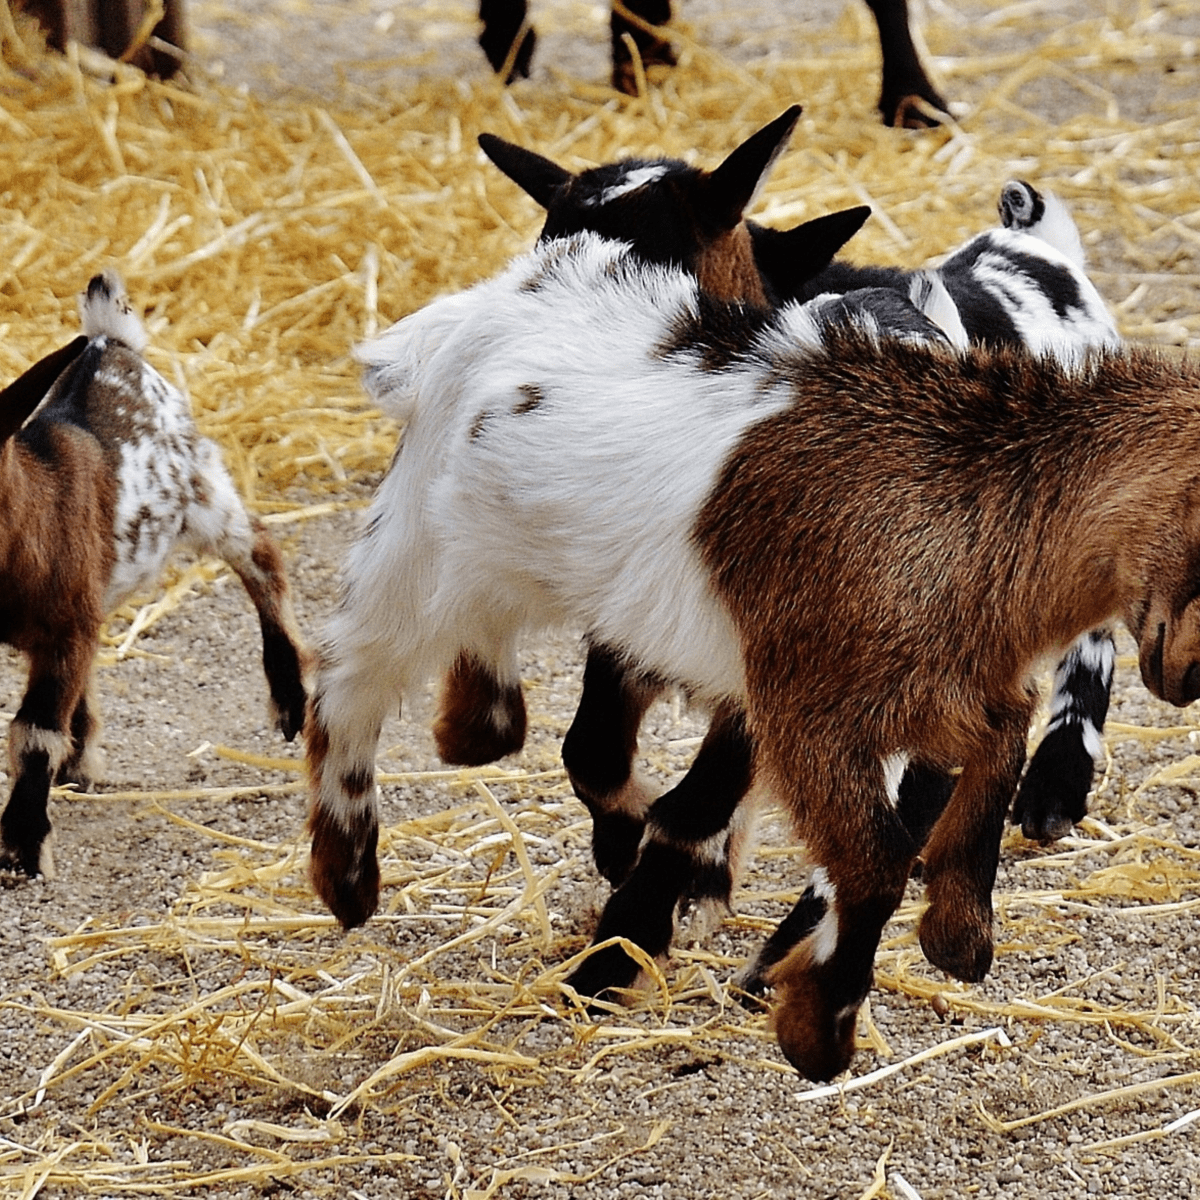 350+ Pet Goat Names for Your New Goat (From Angus to Waffles) - PetHelpful